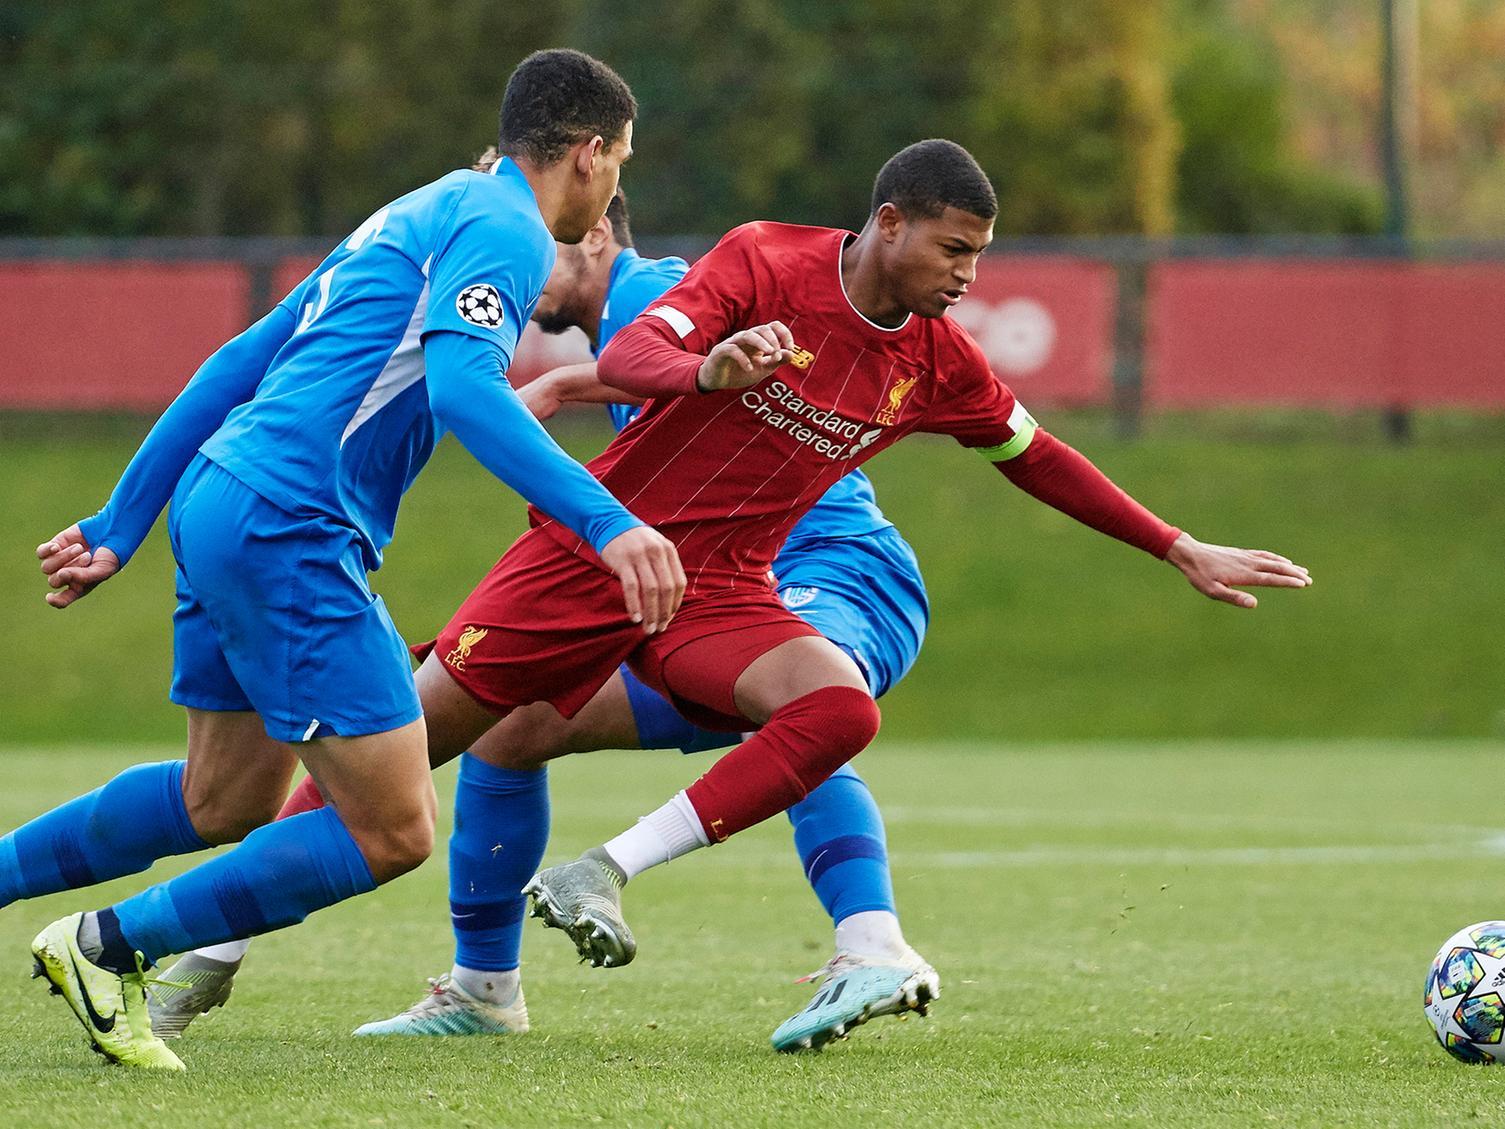 Premier League leaders Liverpool are ready to send young star Rhian Brewster out on loan in the January transfer window, with Championship pair Leeds United and Swansea City among those said keen on the starlet. (Daily Mail)